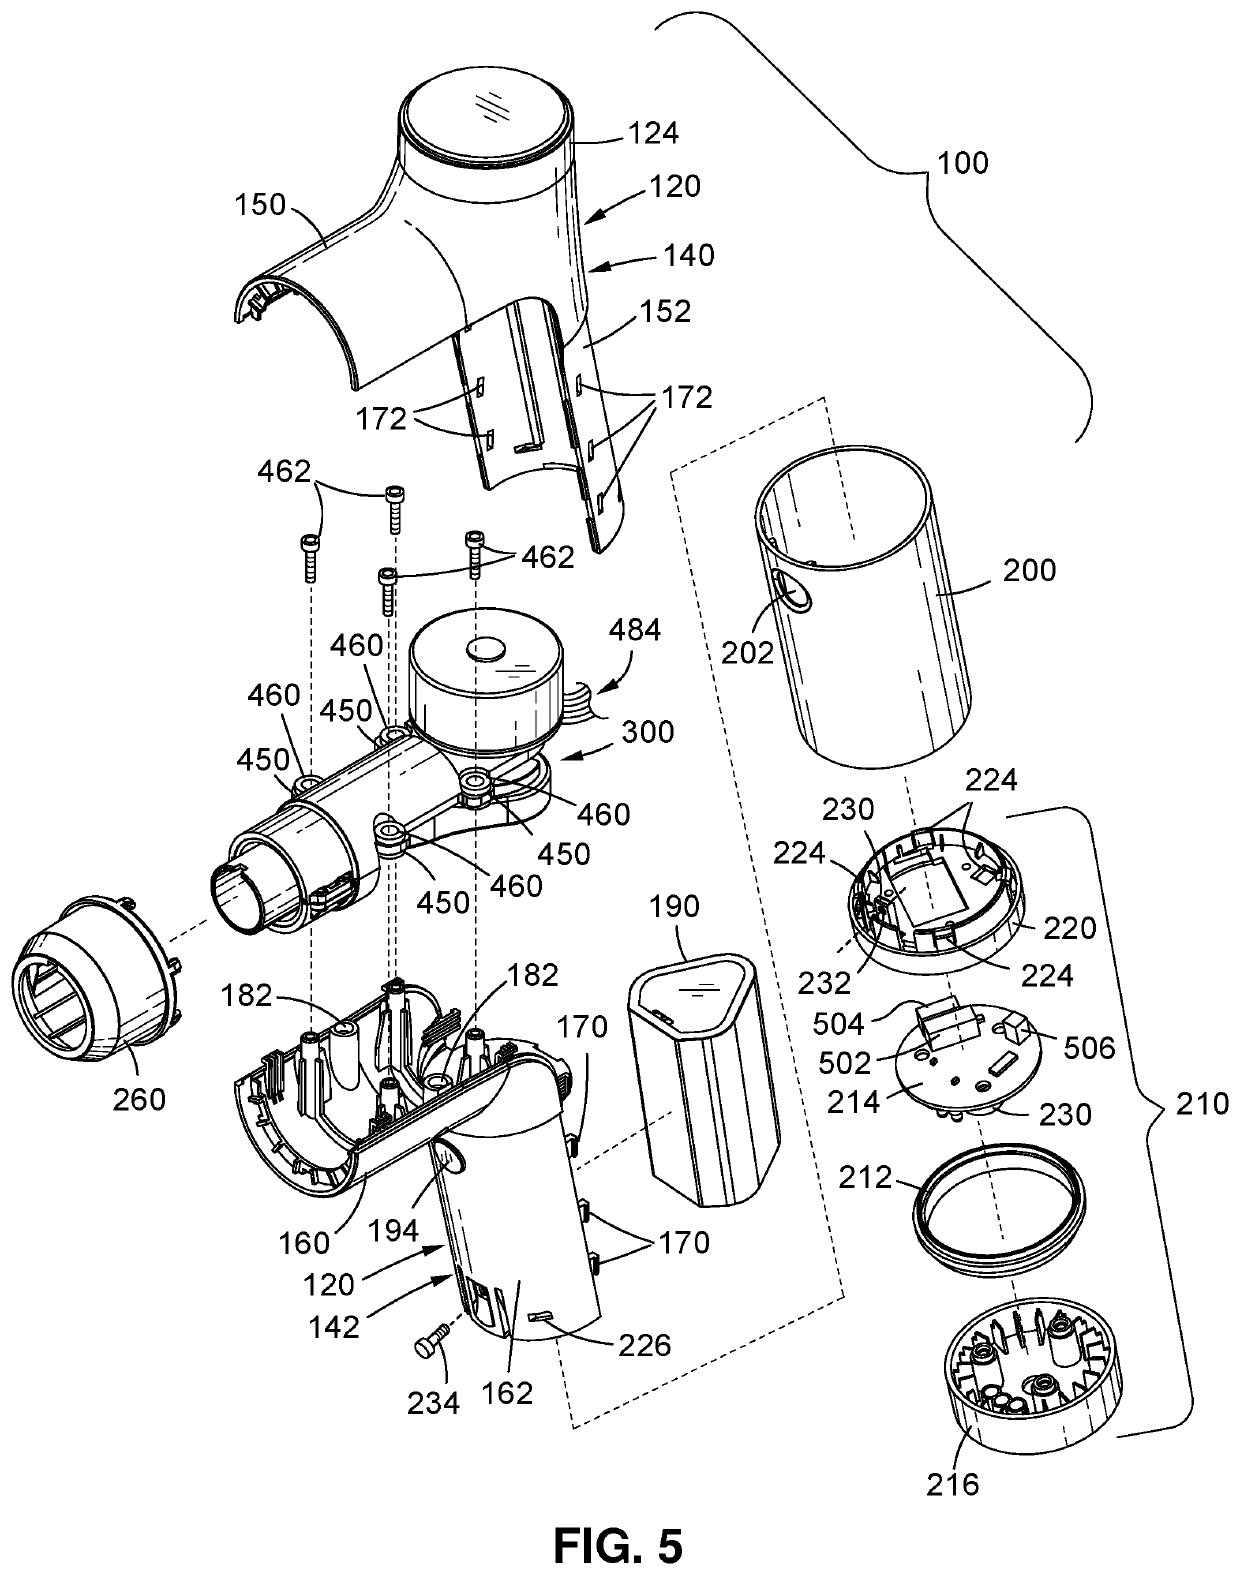 Motor and piston assembly for percussive massage device